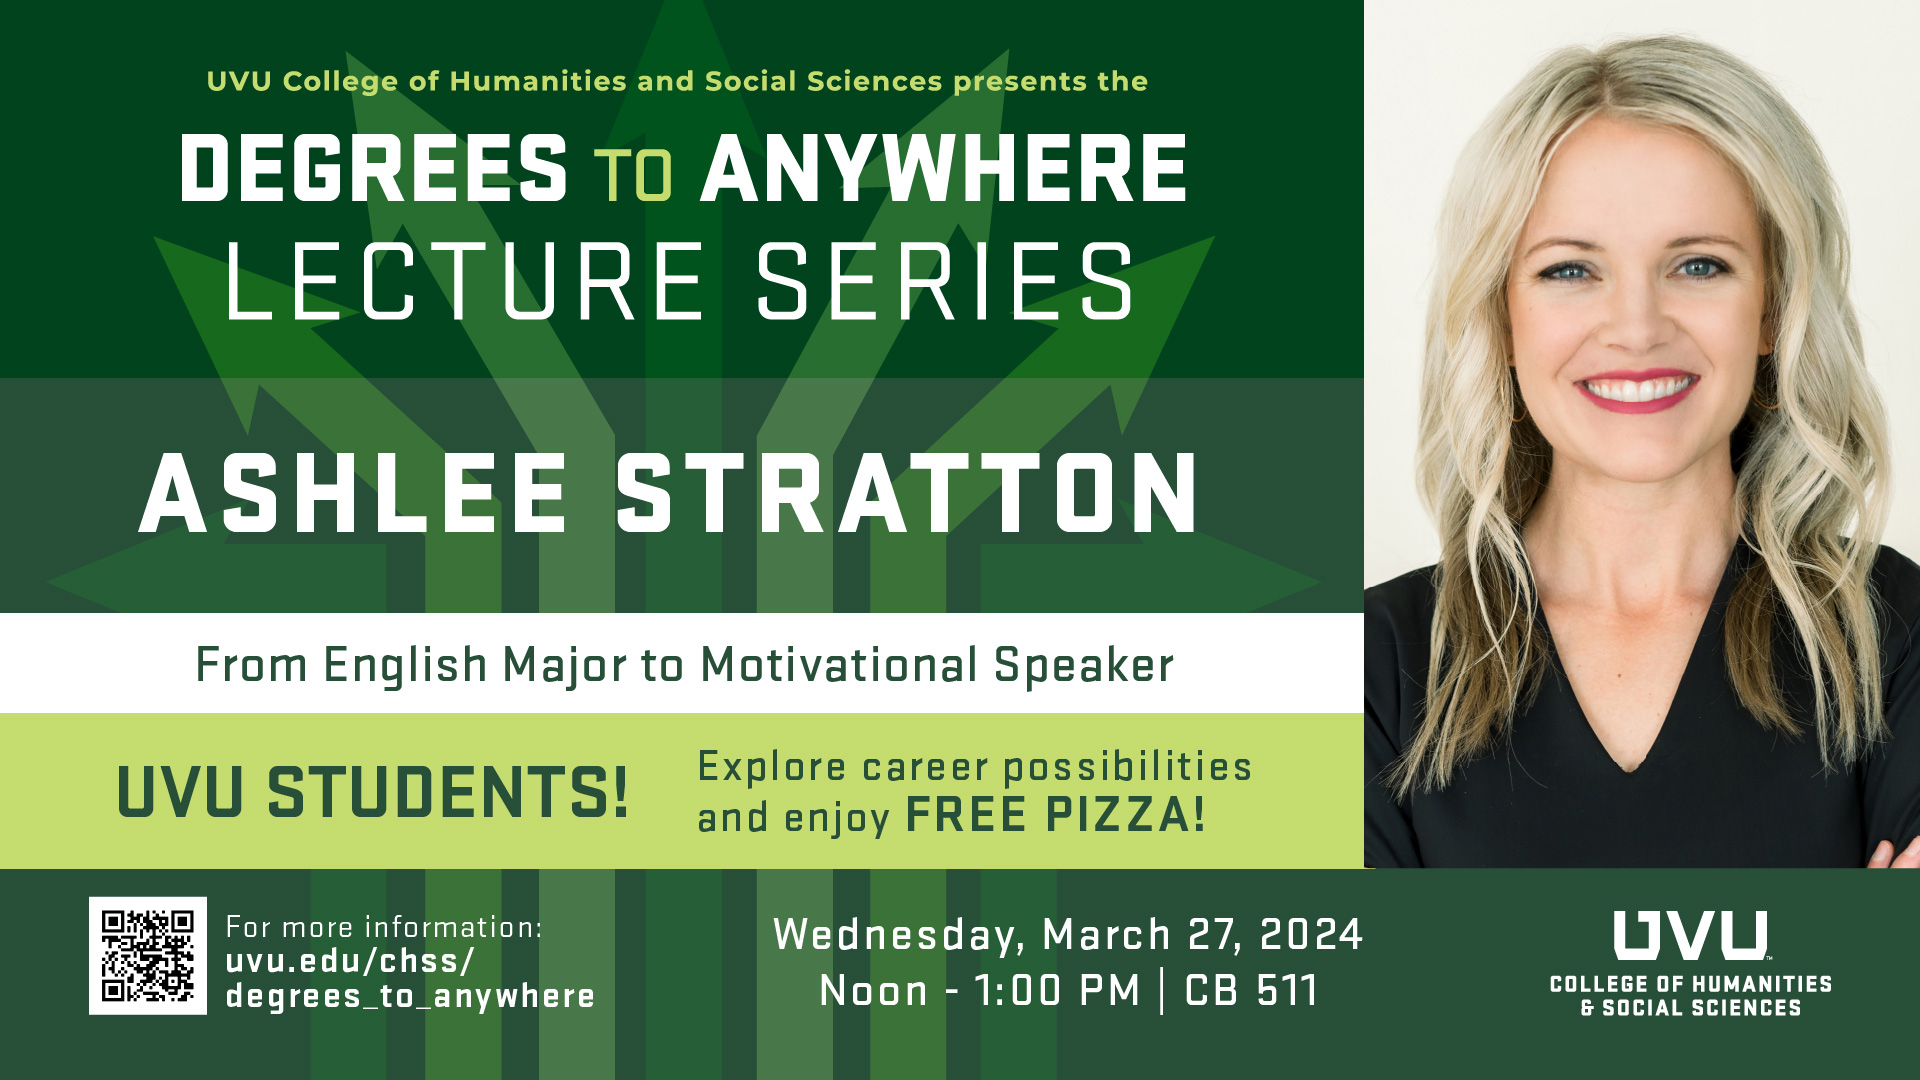 Degrees to Anywhere speaker Ashlee Stratton, presenting on March 27, 2024 at 12pm-1pm in CB510/511